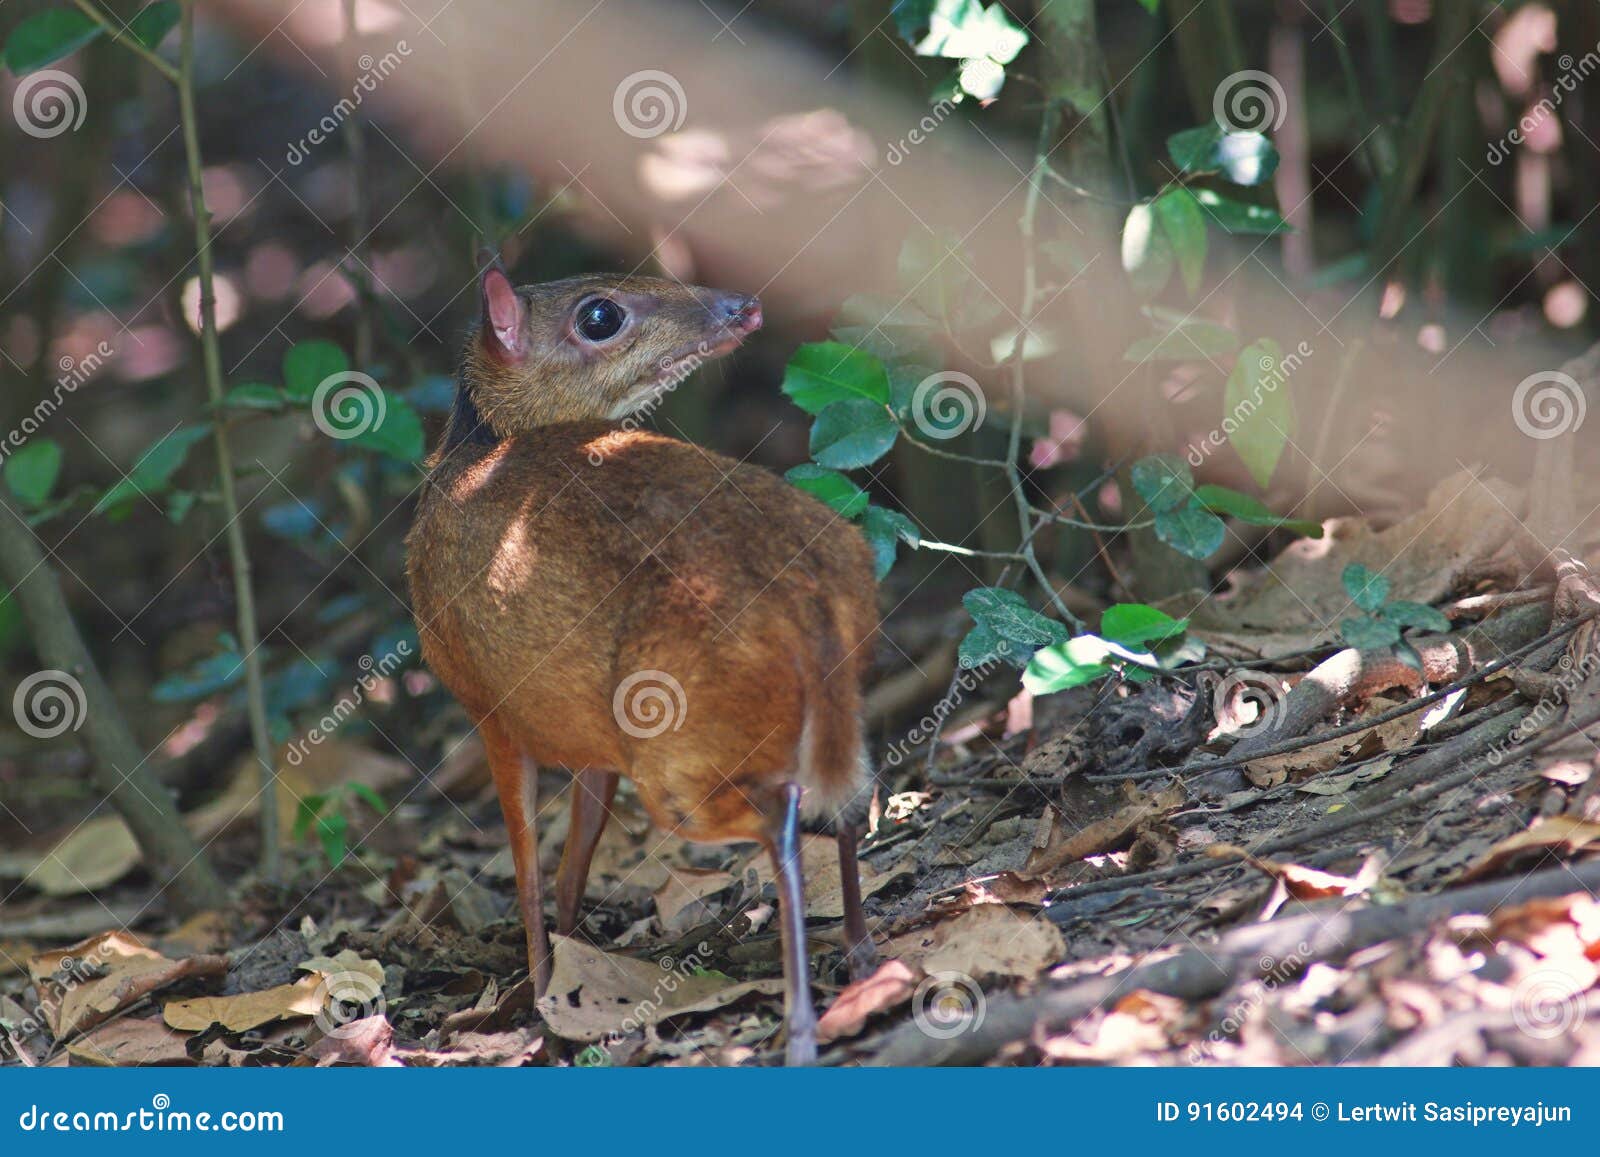 mouse deer; small ungulates